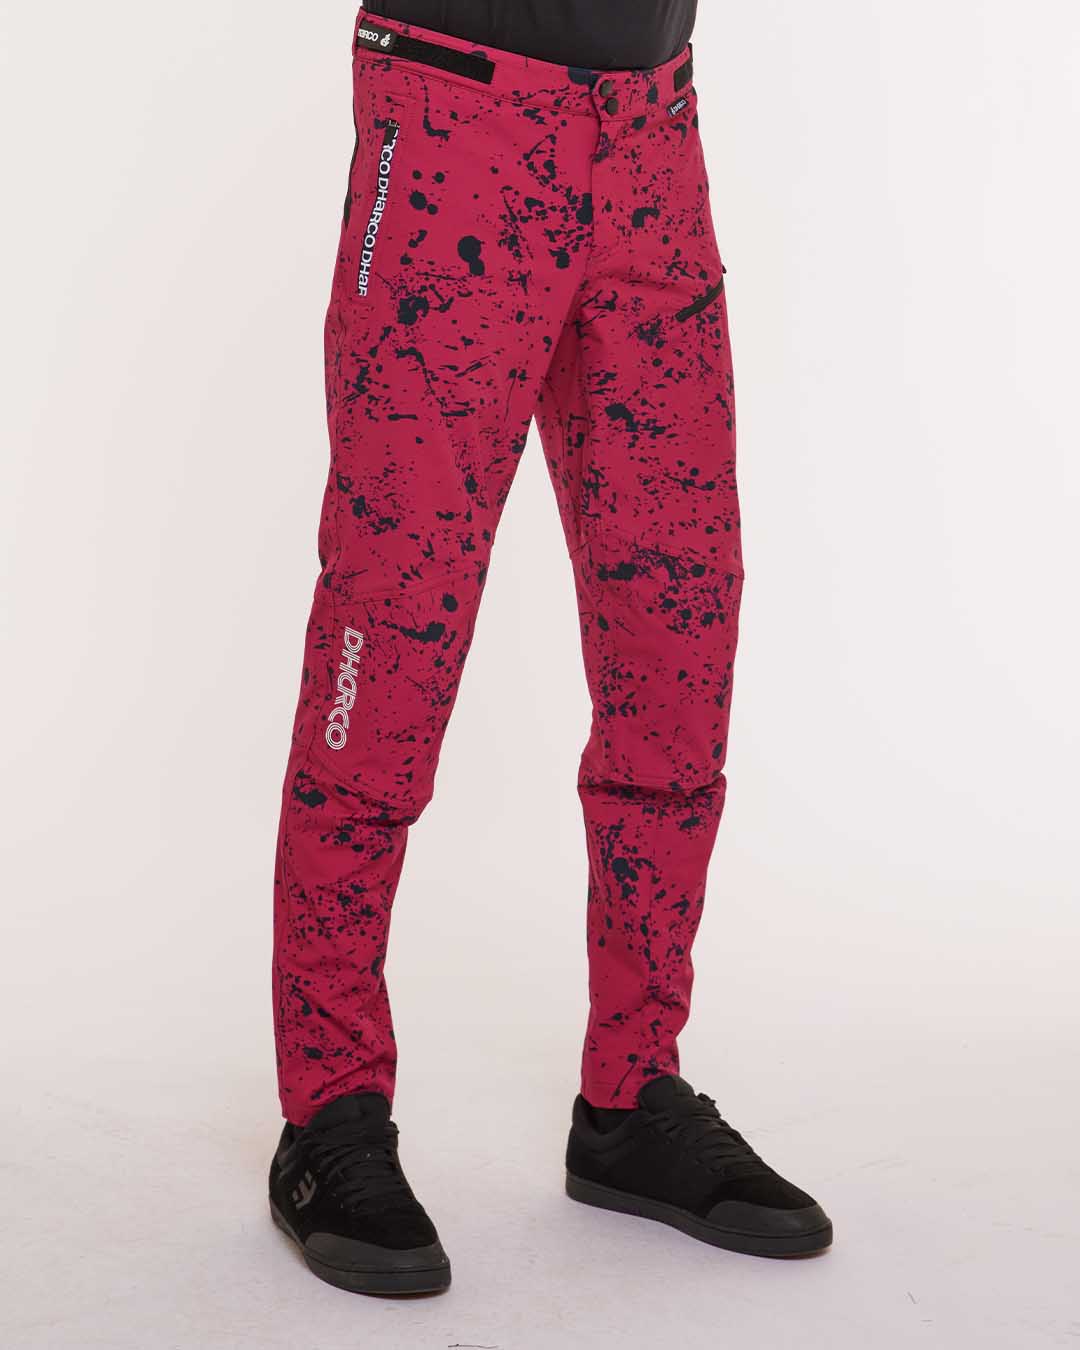 Mens Gravity Pants | Chili Peppers